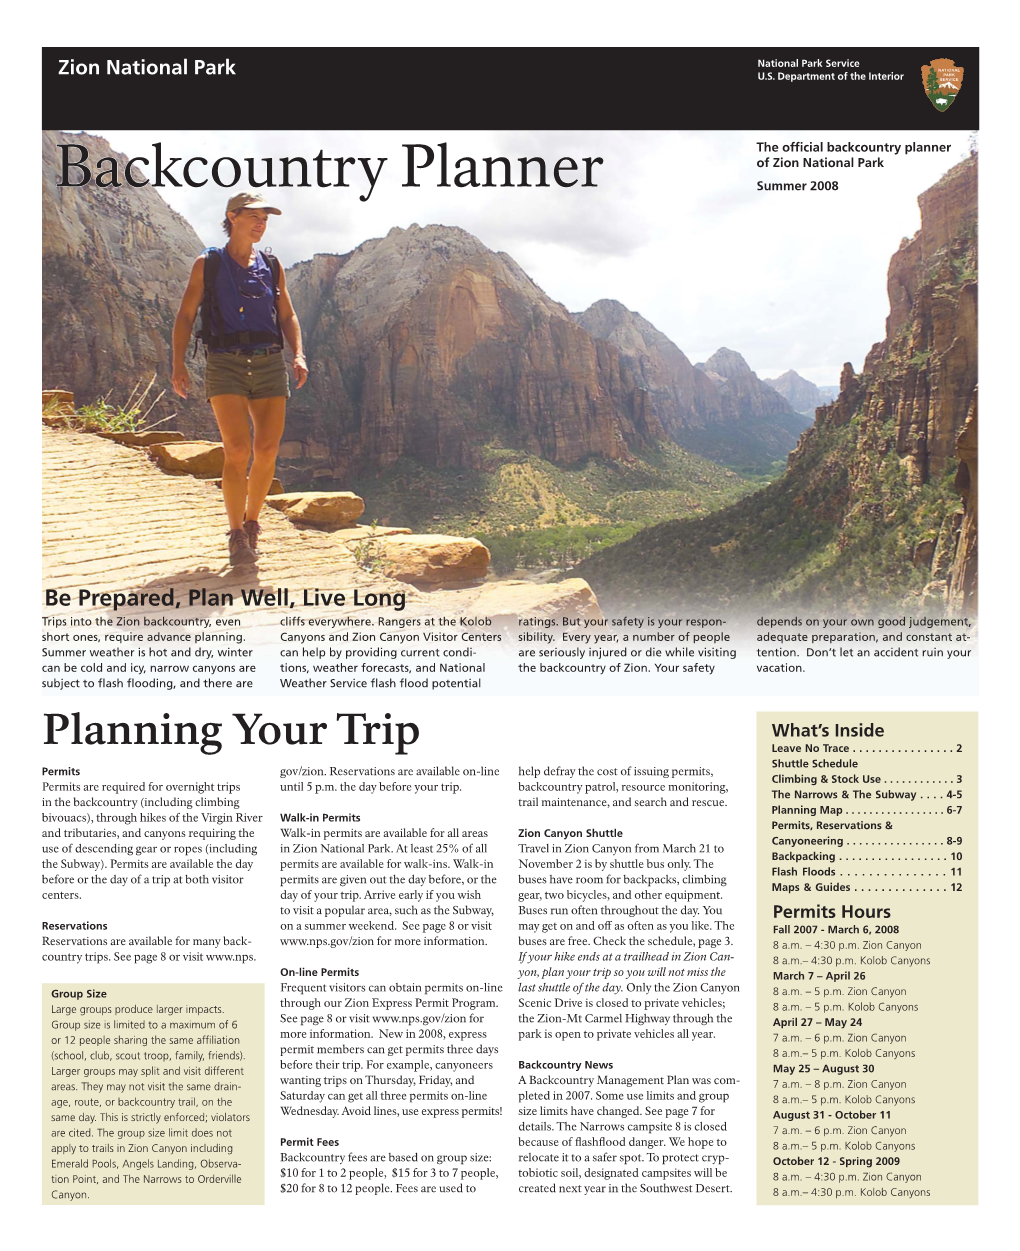 Backcountry Planner of Zion National Park Bbackcountryackcountry Plannerplanner Summer 2008